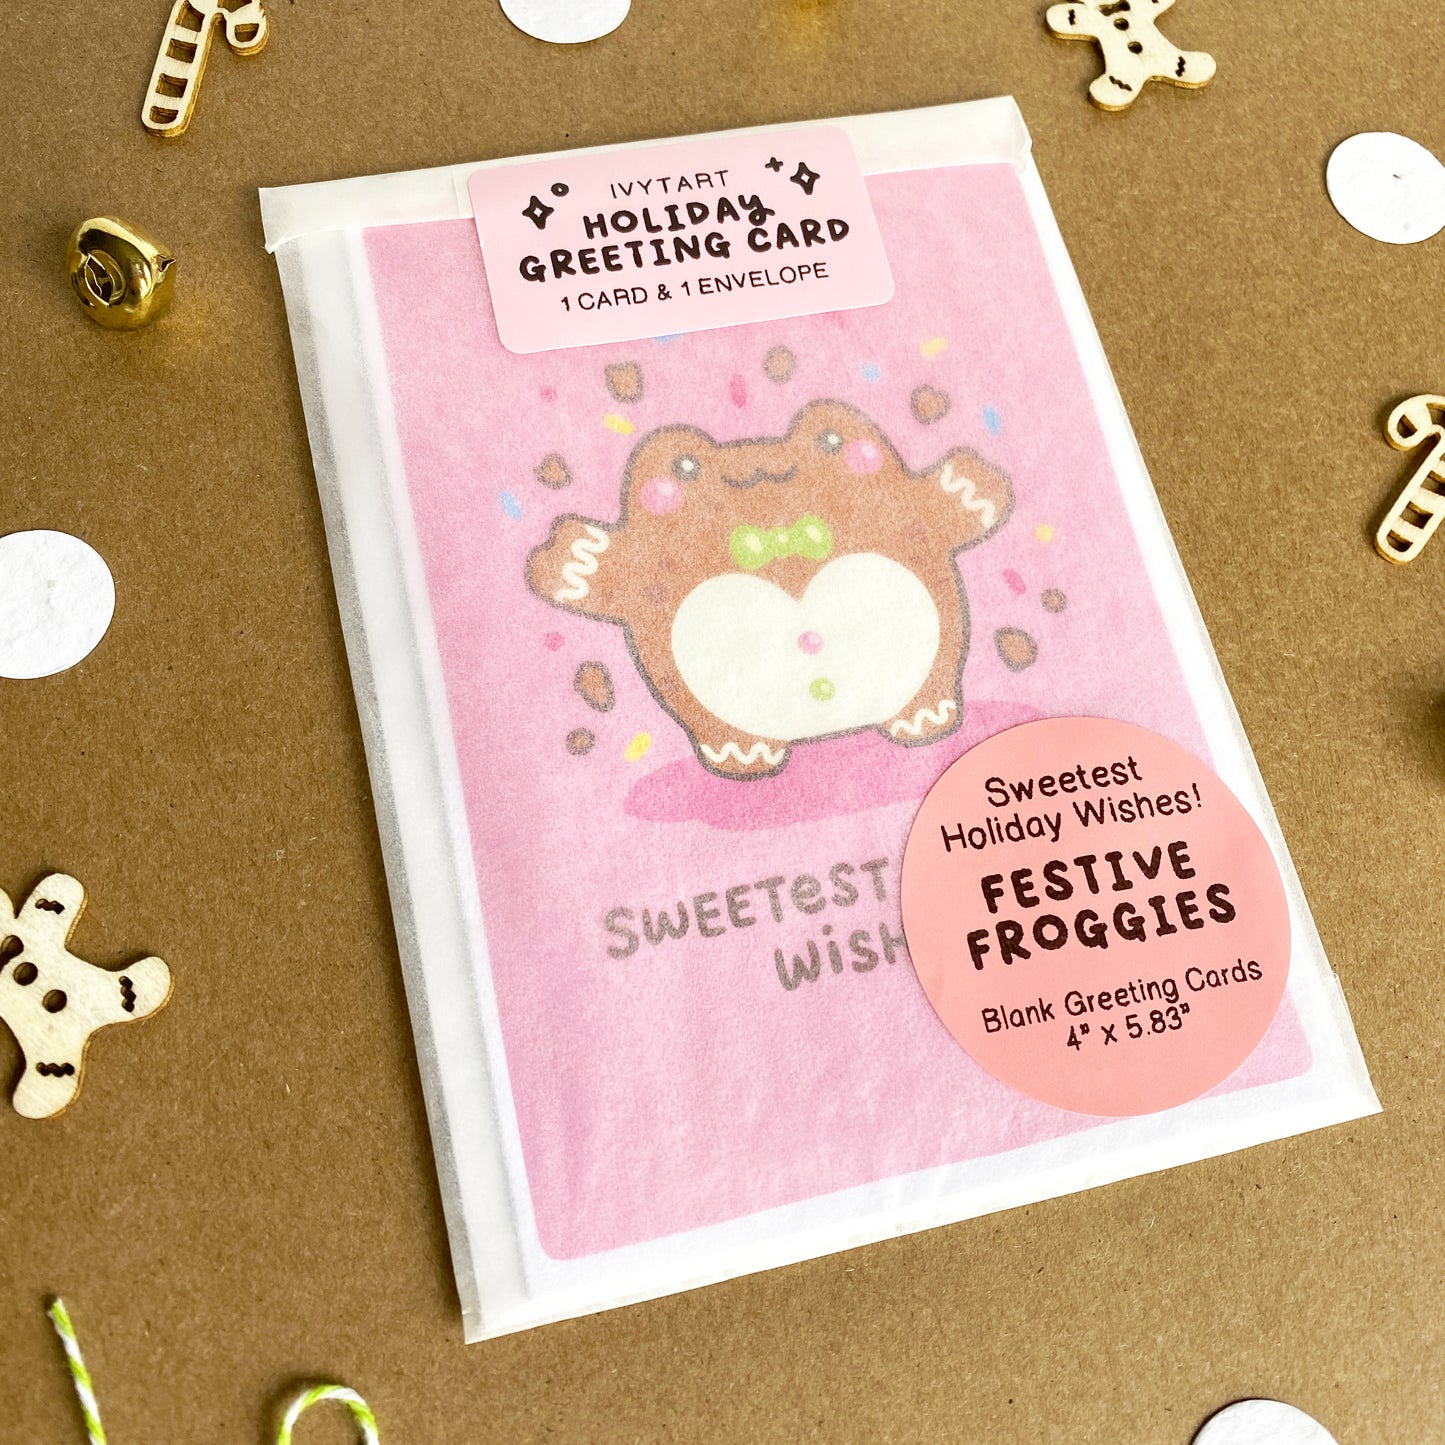 "Sweetest Holiday Wishes" Froggy Greeting Card | Holiday Card